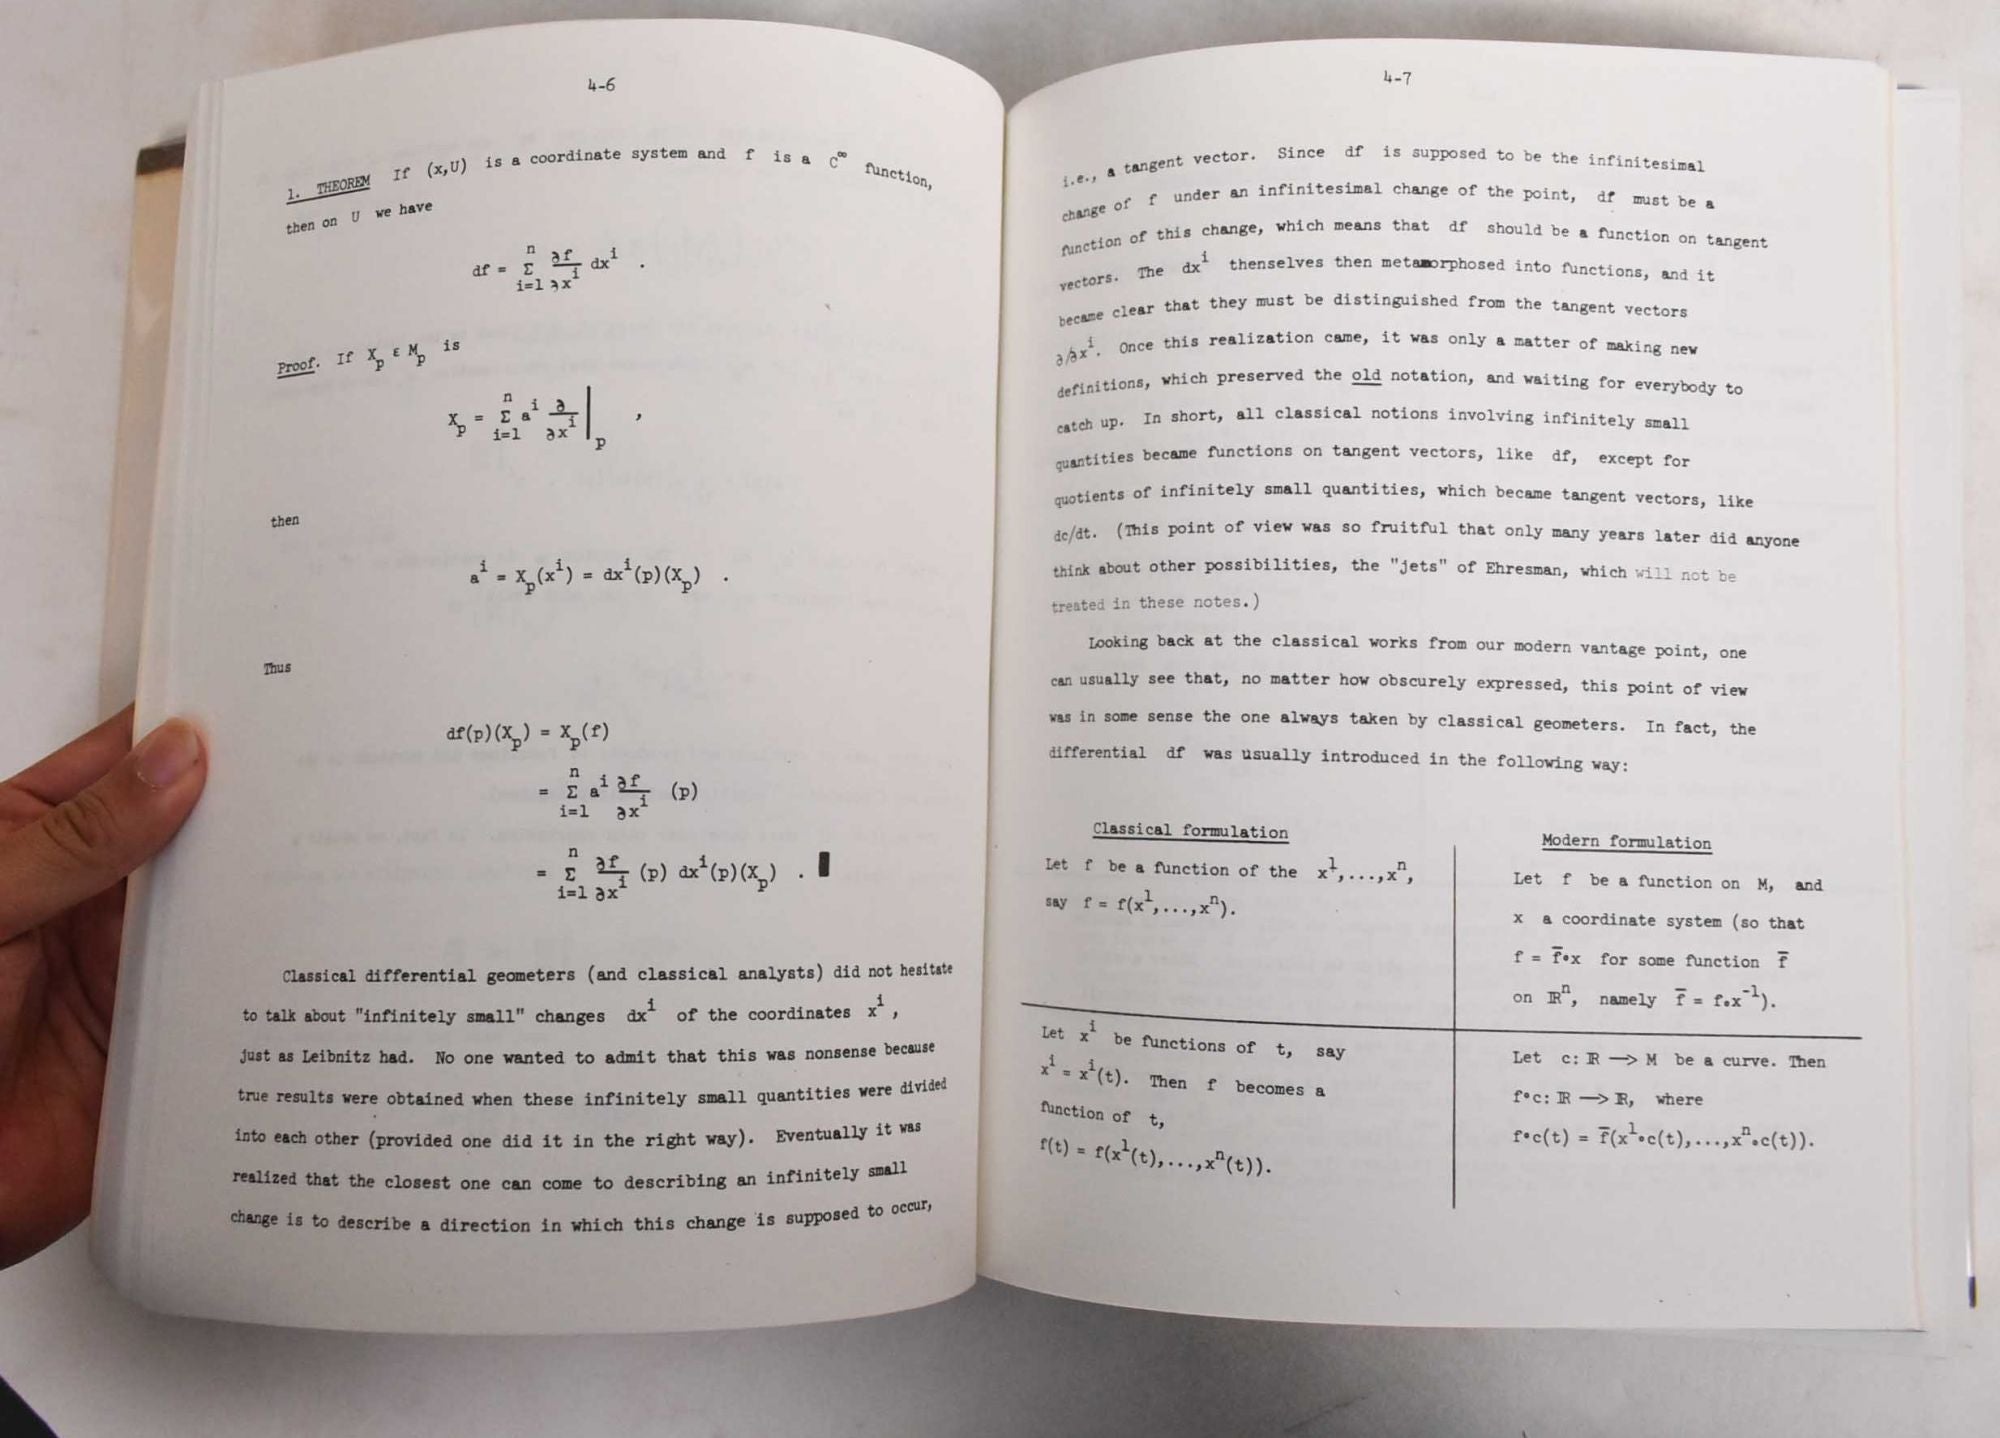 A Comprehensive Introduction To Differential Geometry Five Volumes 